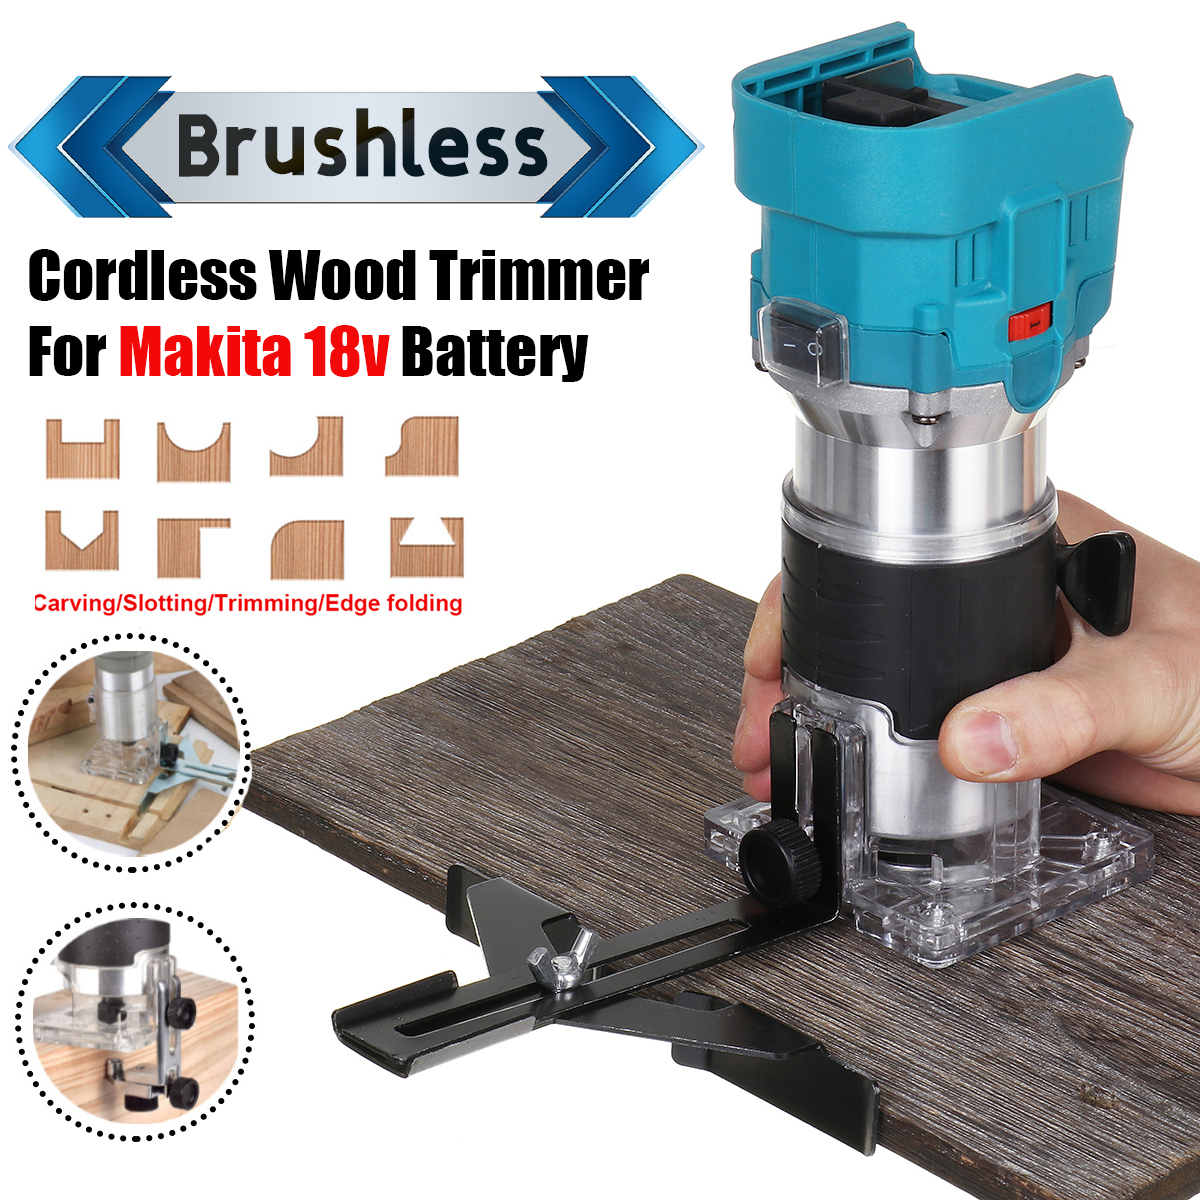 1000W-6-Speed-Brushless-Electric-Wood-Trimmer-Router-635mm-Steel-Chuck-For-Wood-Chamfering-Grooving--1840159-1